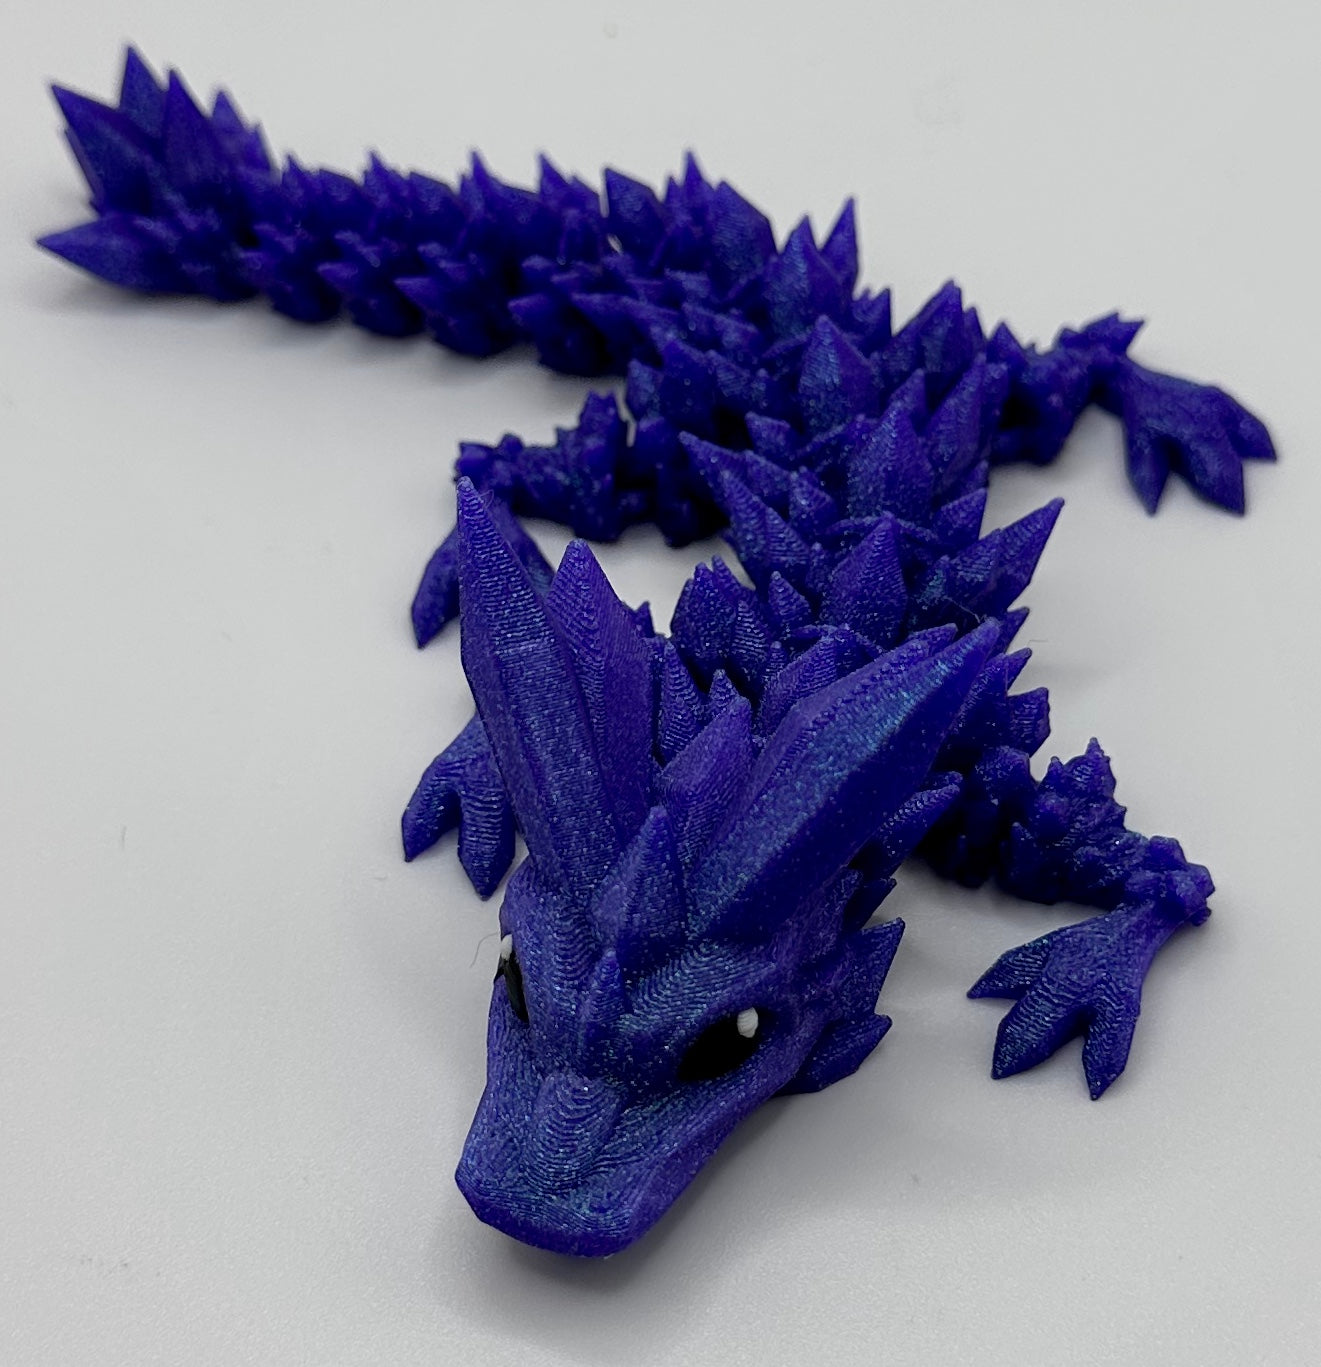 I made more monsters from pipecleaners : r/MonsterHunter